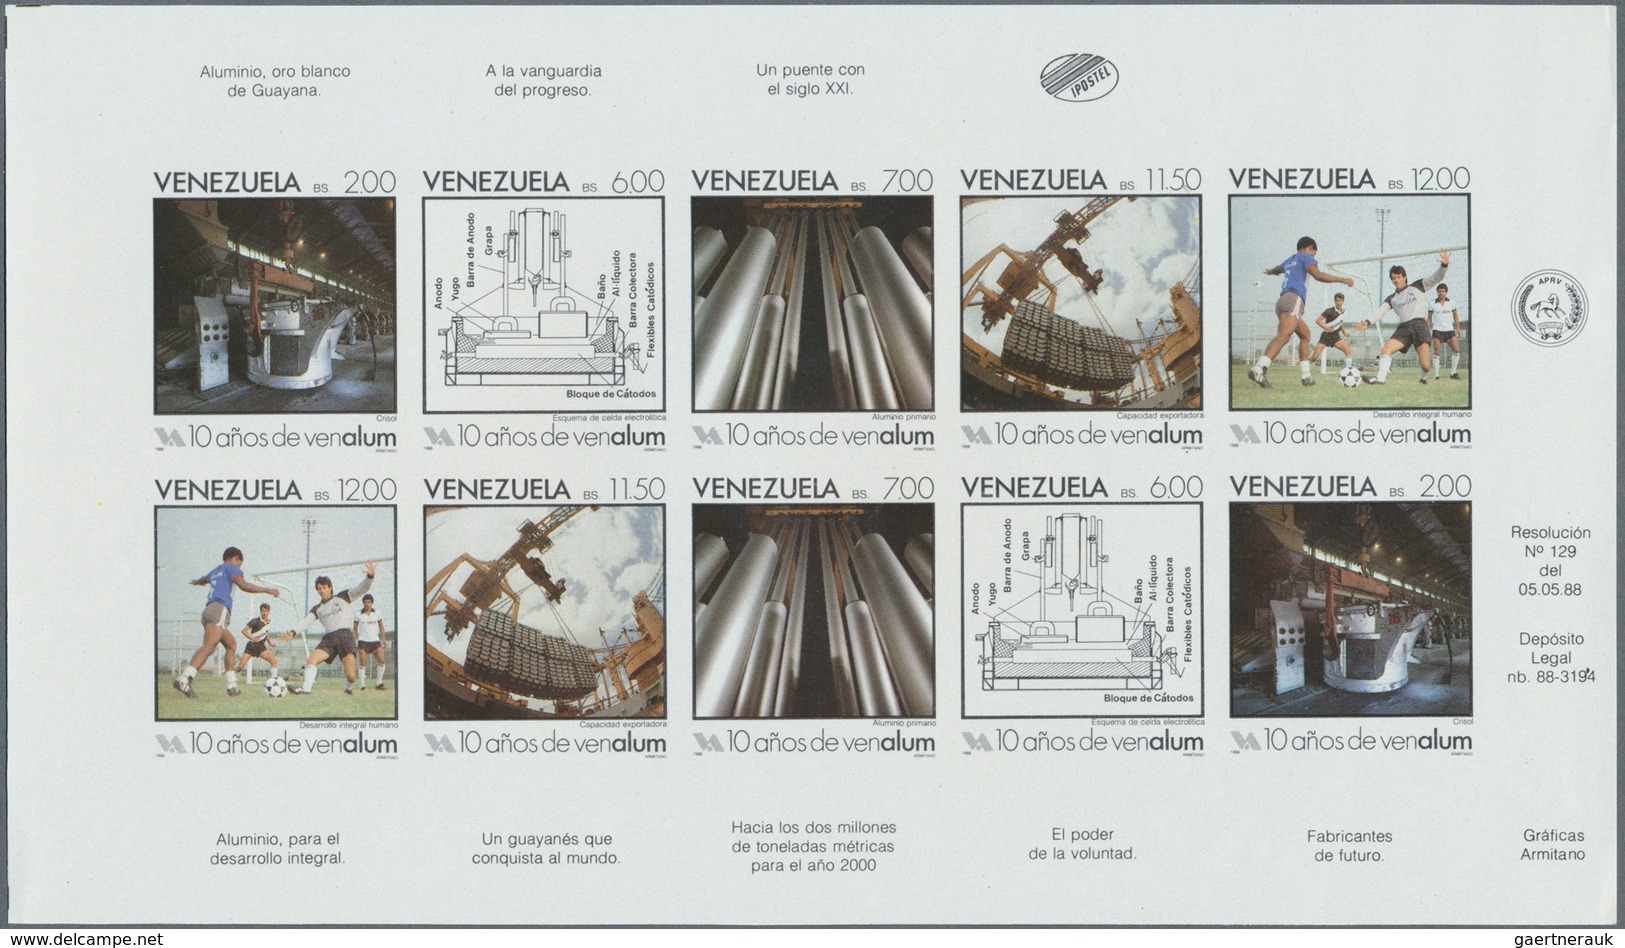 Venezuela: 1987/1988, seven imperforated mini sheets without gum. Included thematics are Christmar,